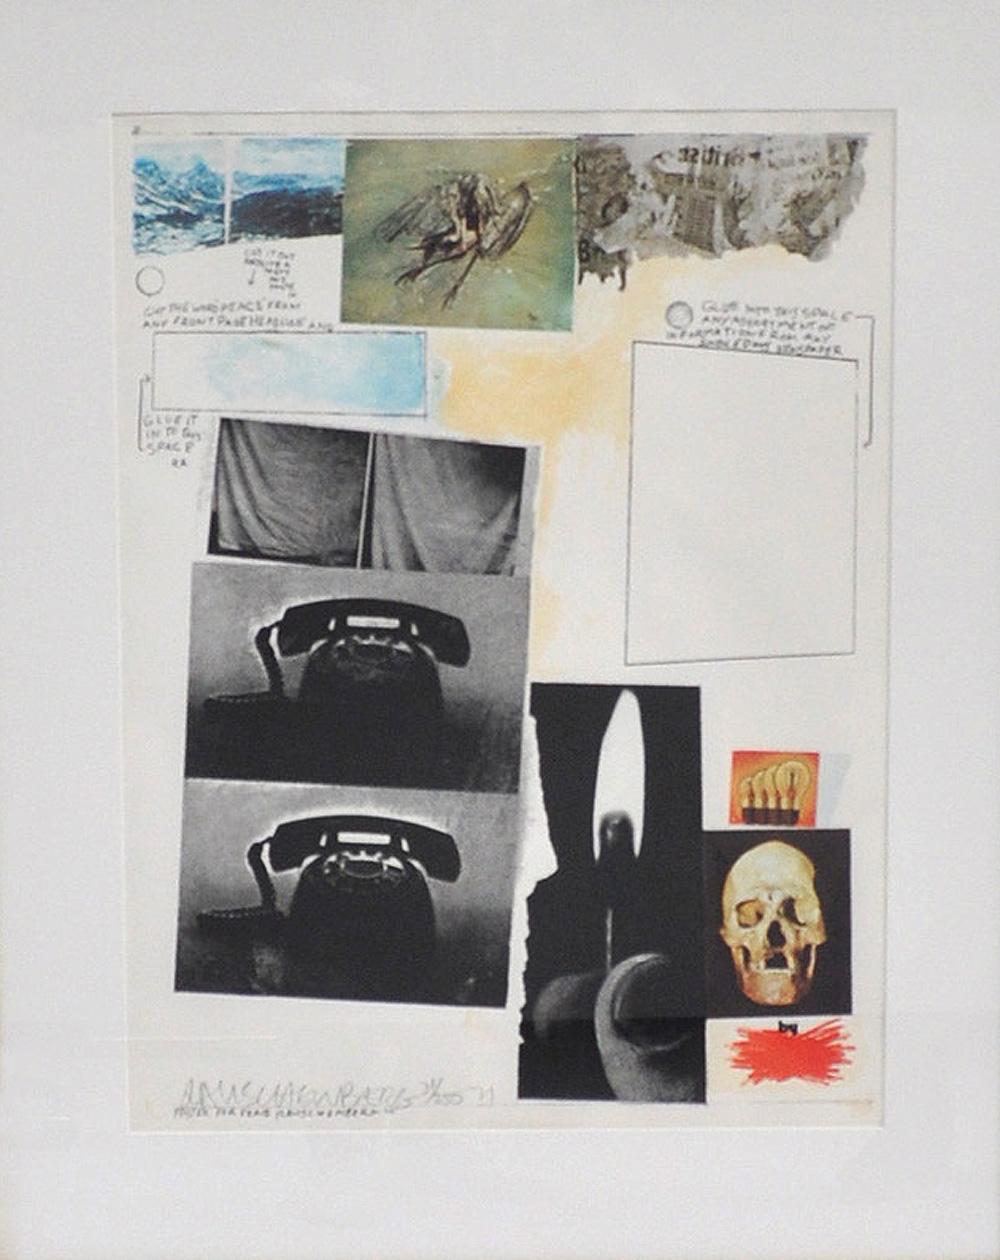 Robert Rauschenberg
Screen Print, Poster for peace, 
signed and numbered 31/250, 1970
71 cm H x 54 cm W
Framed

Robert Rauschenberg (1925 - 2008) one of the most important artists in the United States in the latter half of the 20th